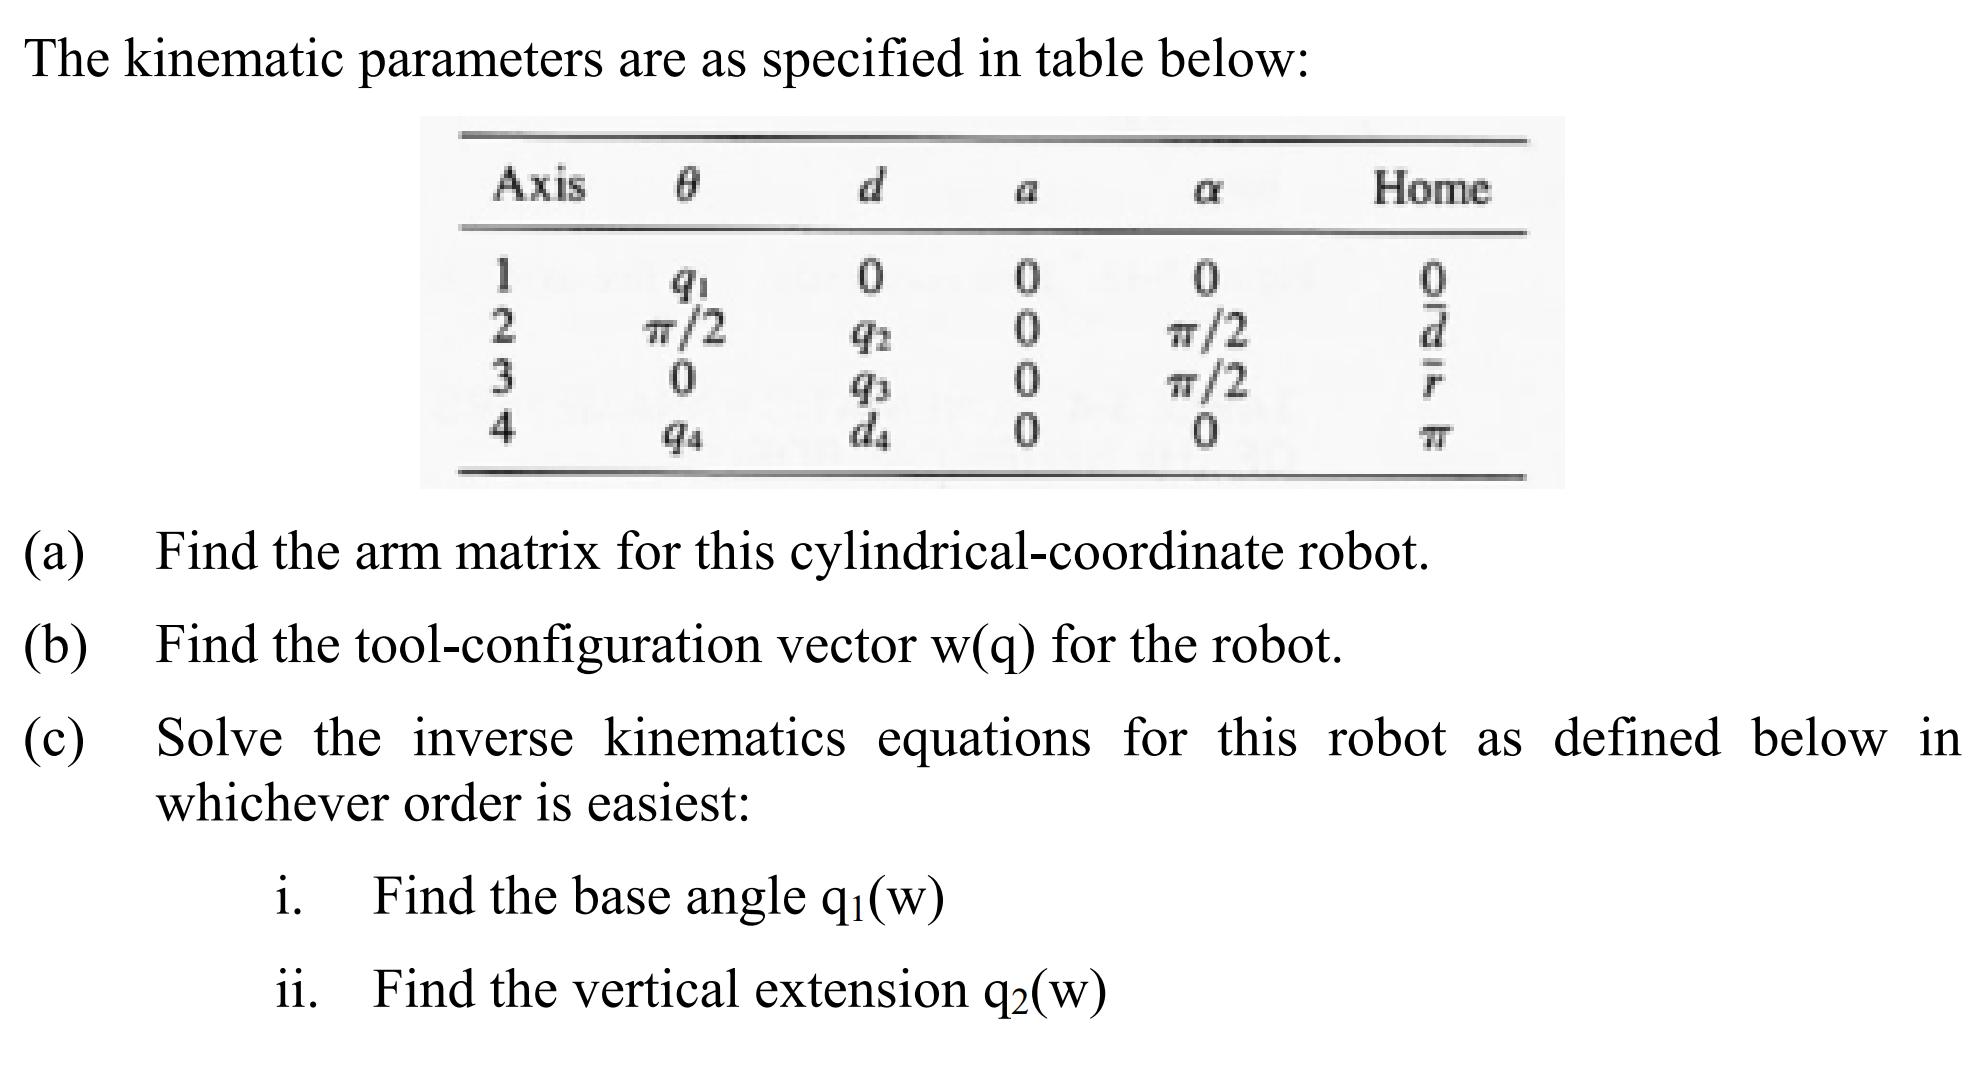 The kinematic parameters are as specified in table below: Axis 1 2 3 4 8 91 /2 0 94 d 0 da 0 0 0 0 0 TT/2